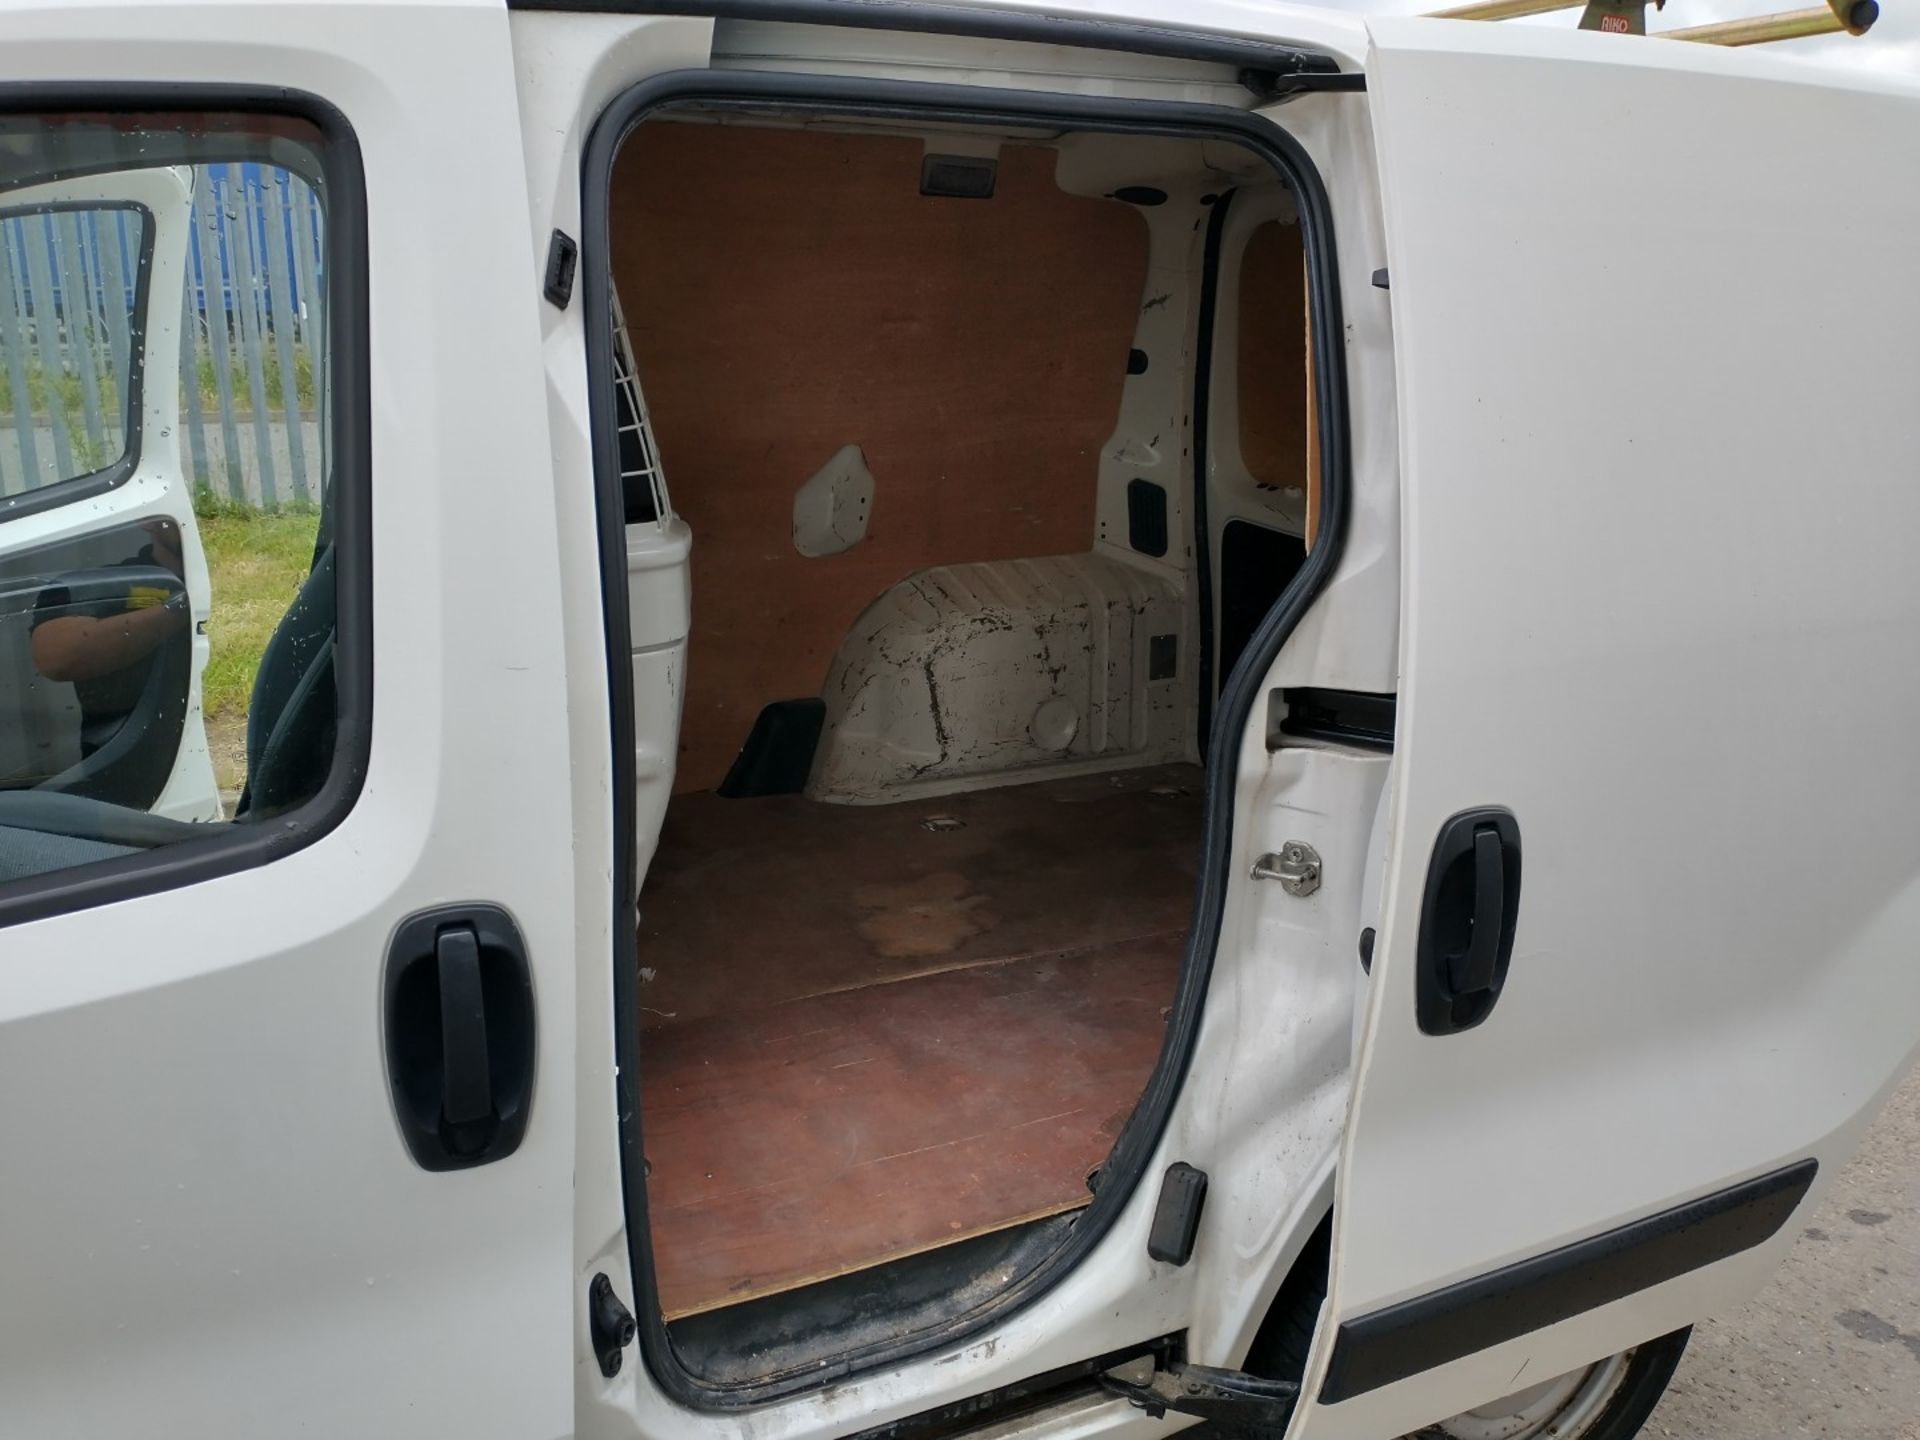 2015 Peugeot Bipper S Hdi White Panel - CL505 - Ref: VVS031 - Location: Corby, Northamptonshire - Image 14 of 25